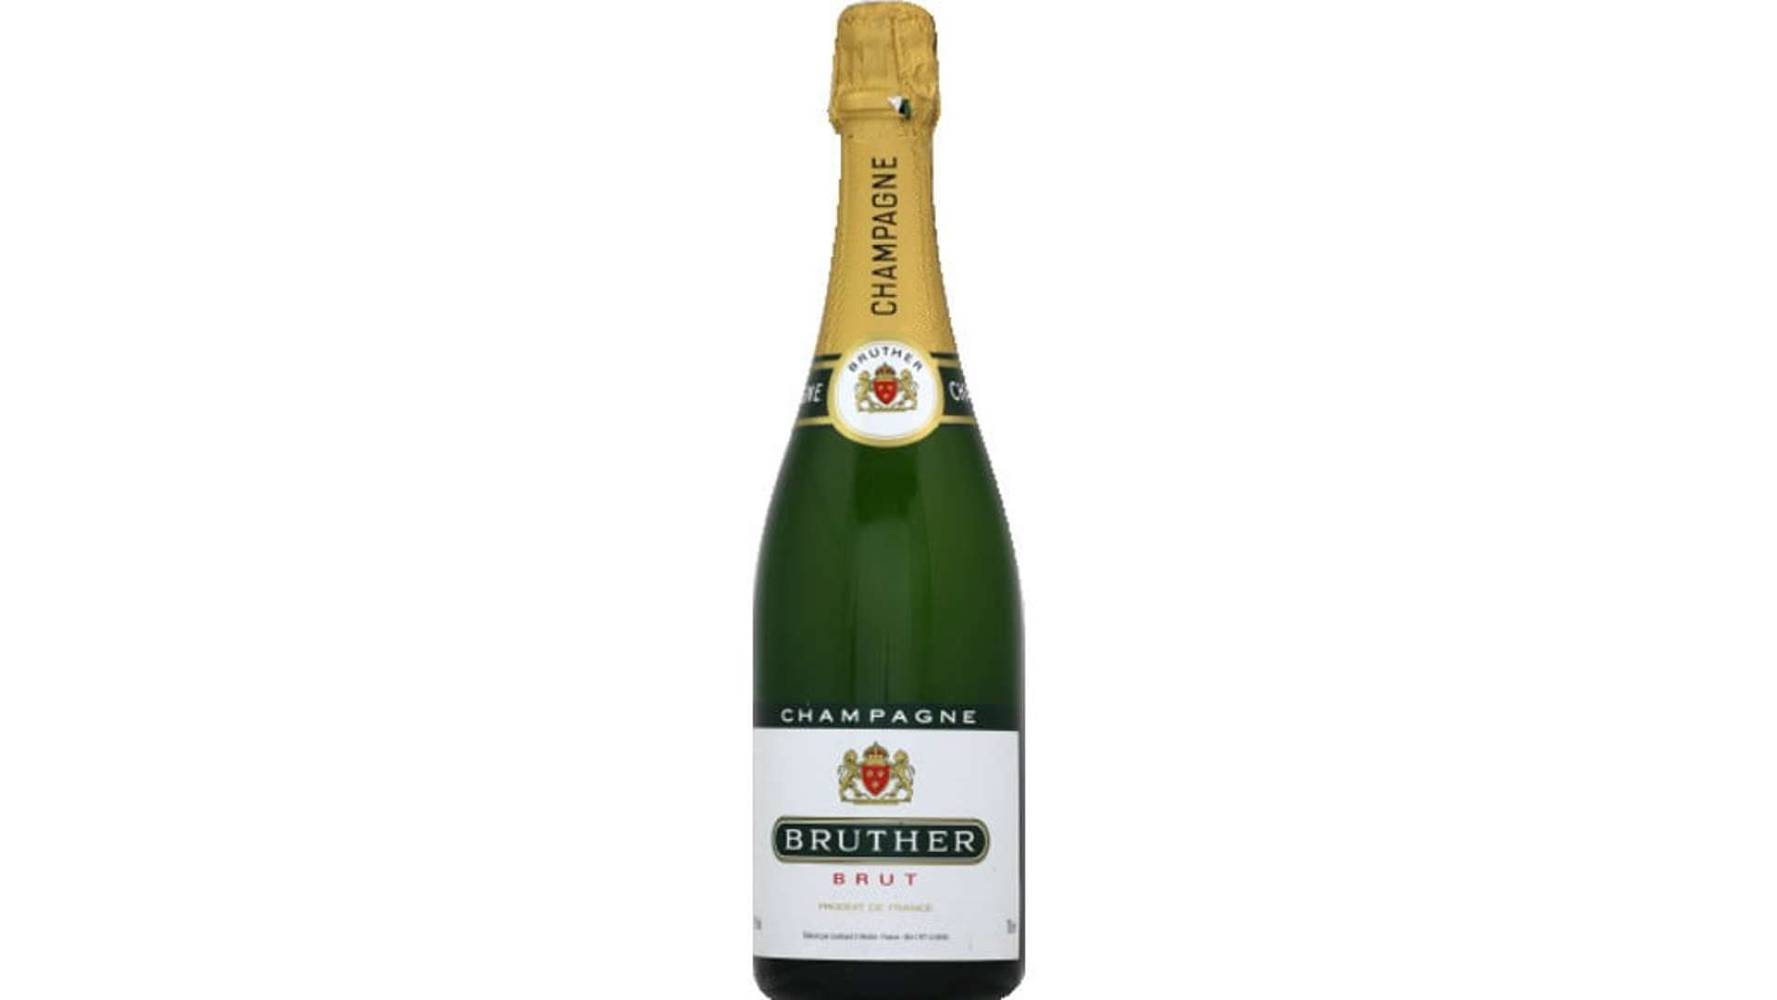 Bruther - Champagne brut (750 ml)